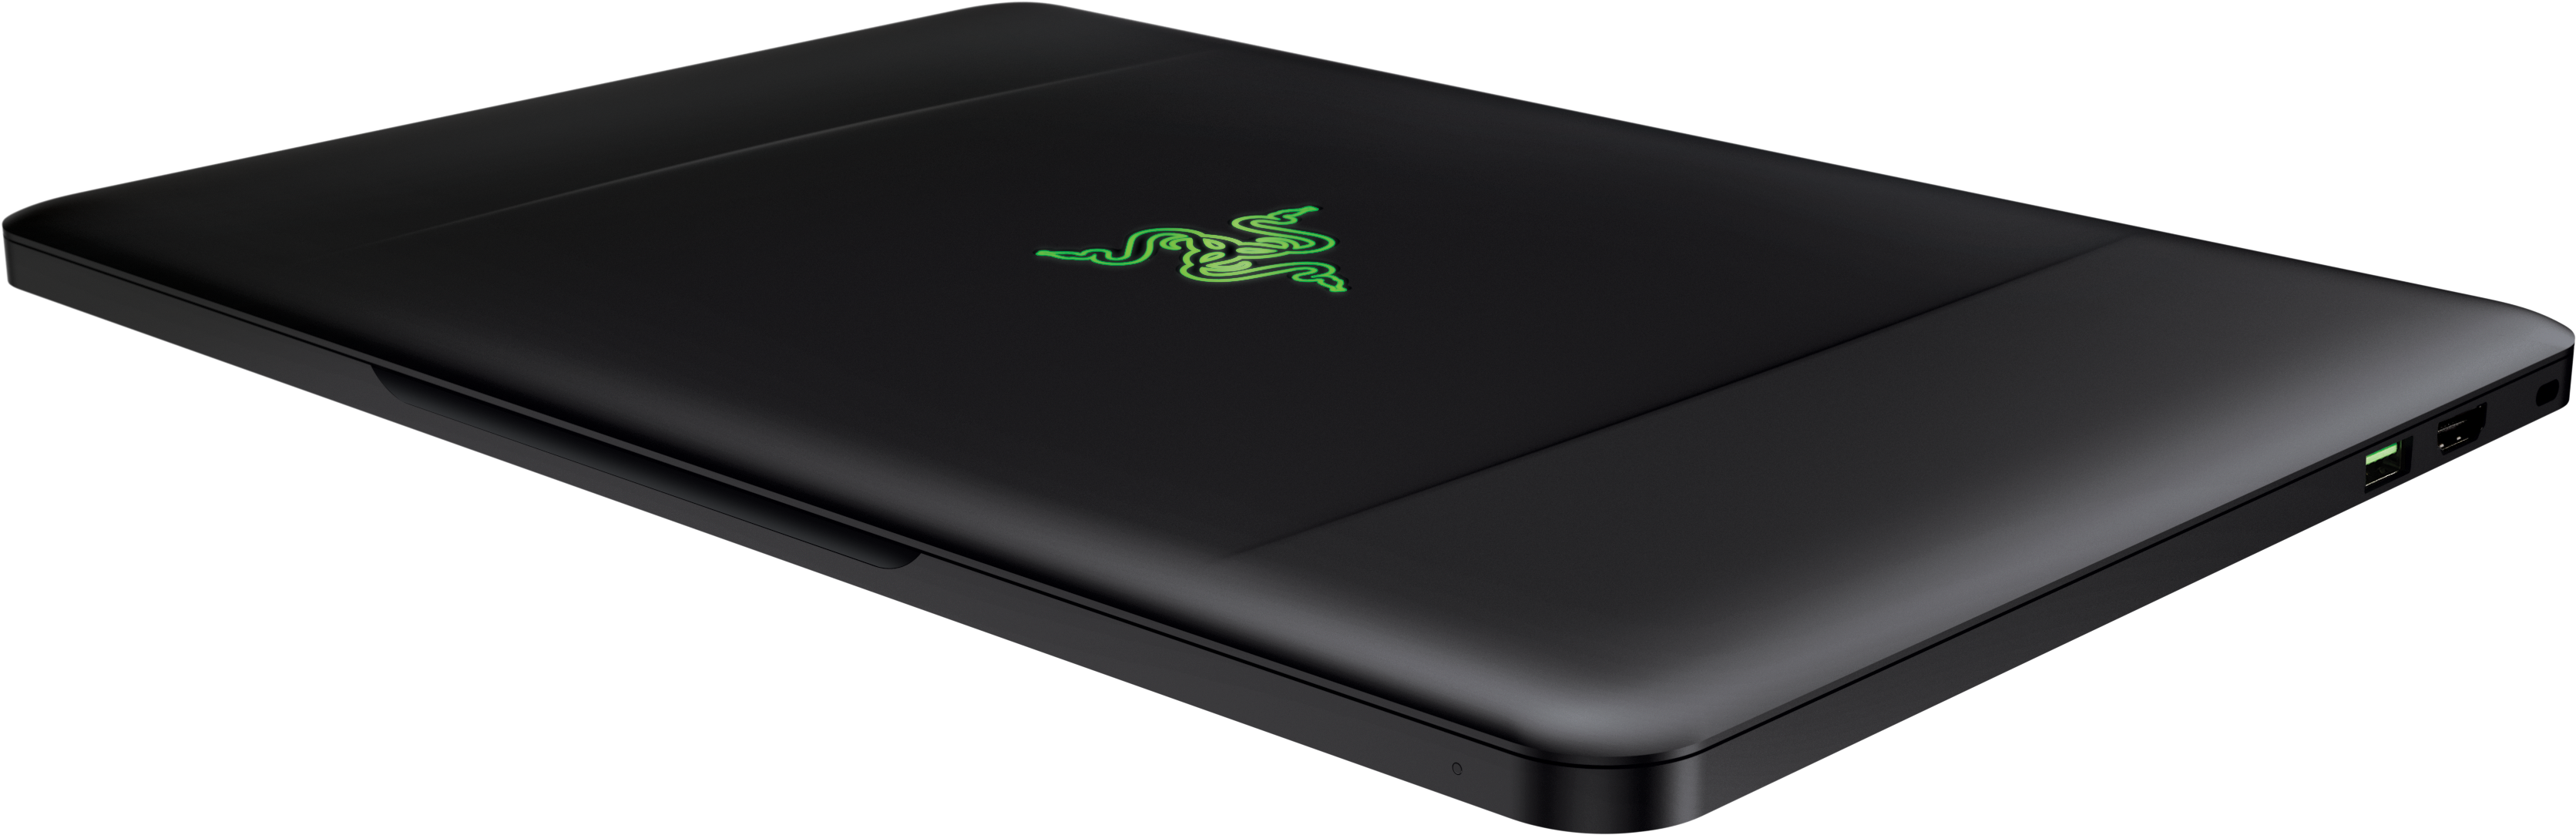 Pc Company Razer Has Announced The Latest Version Of - Anker Power Bank 26800mah (3840x2160), Png Download